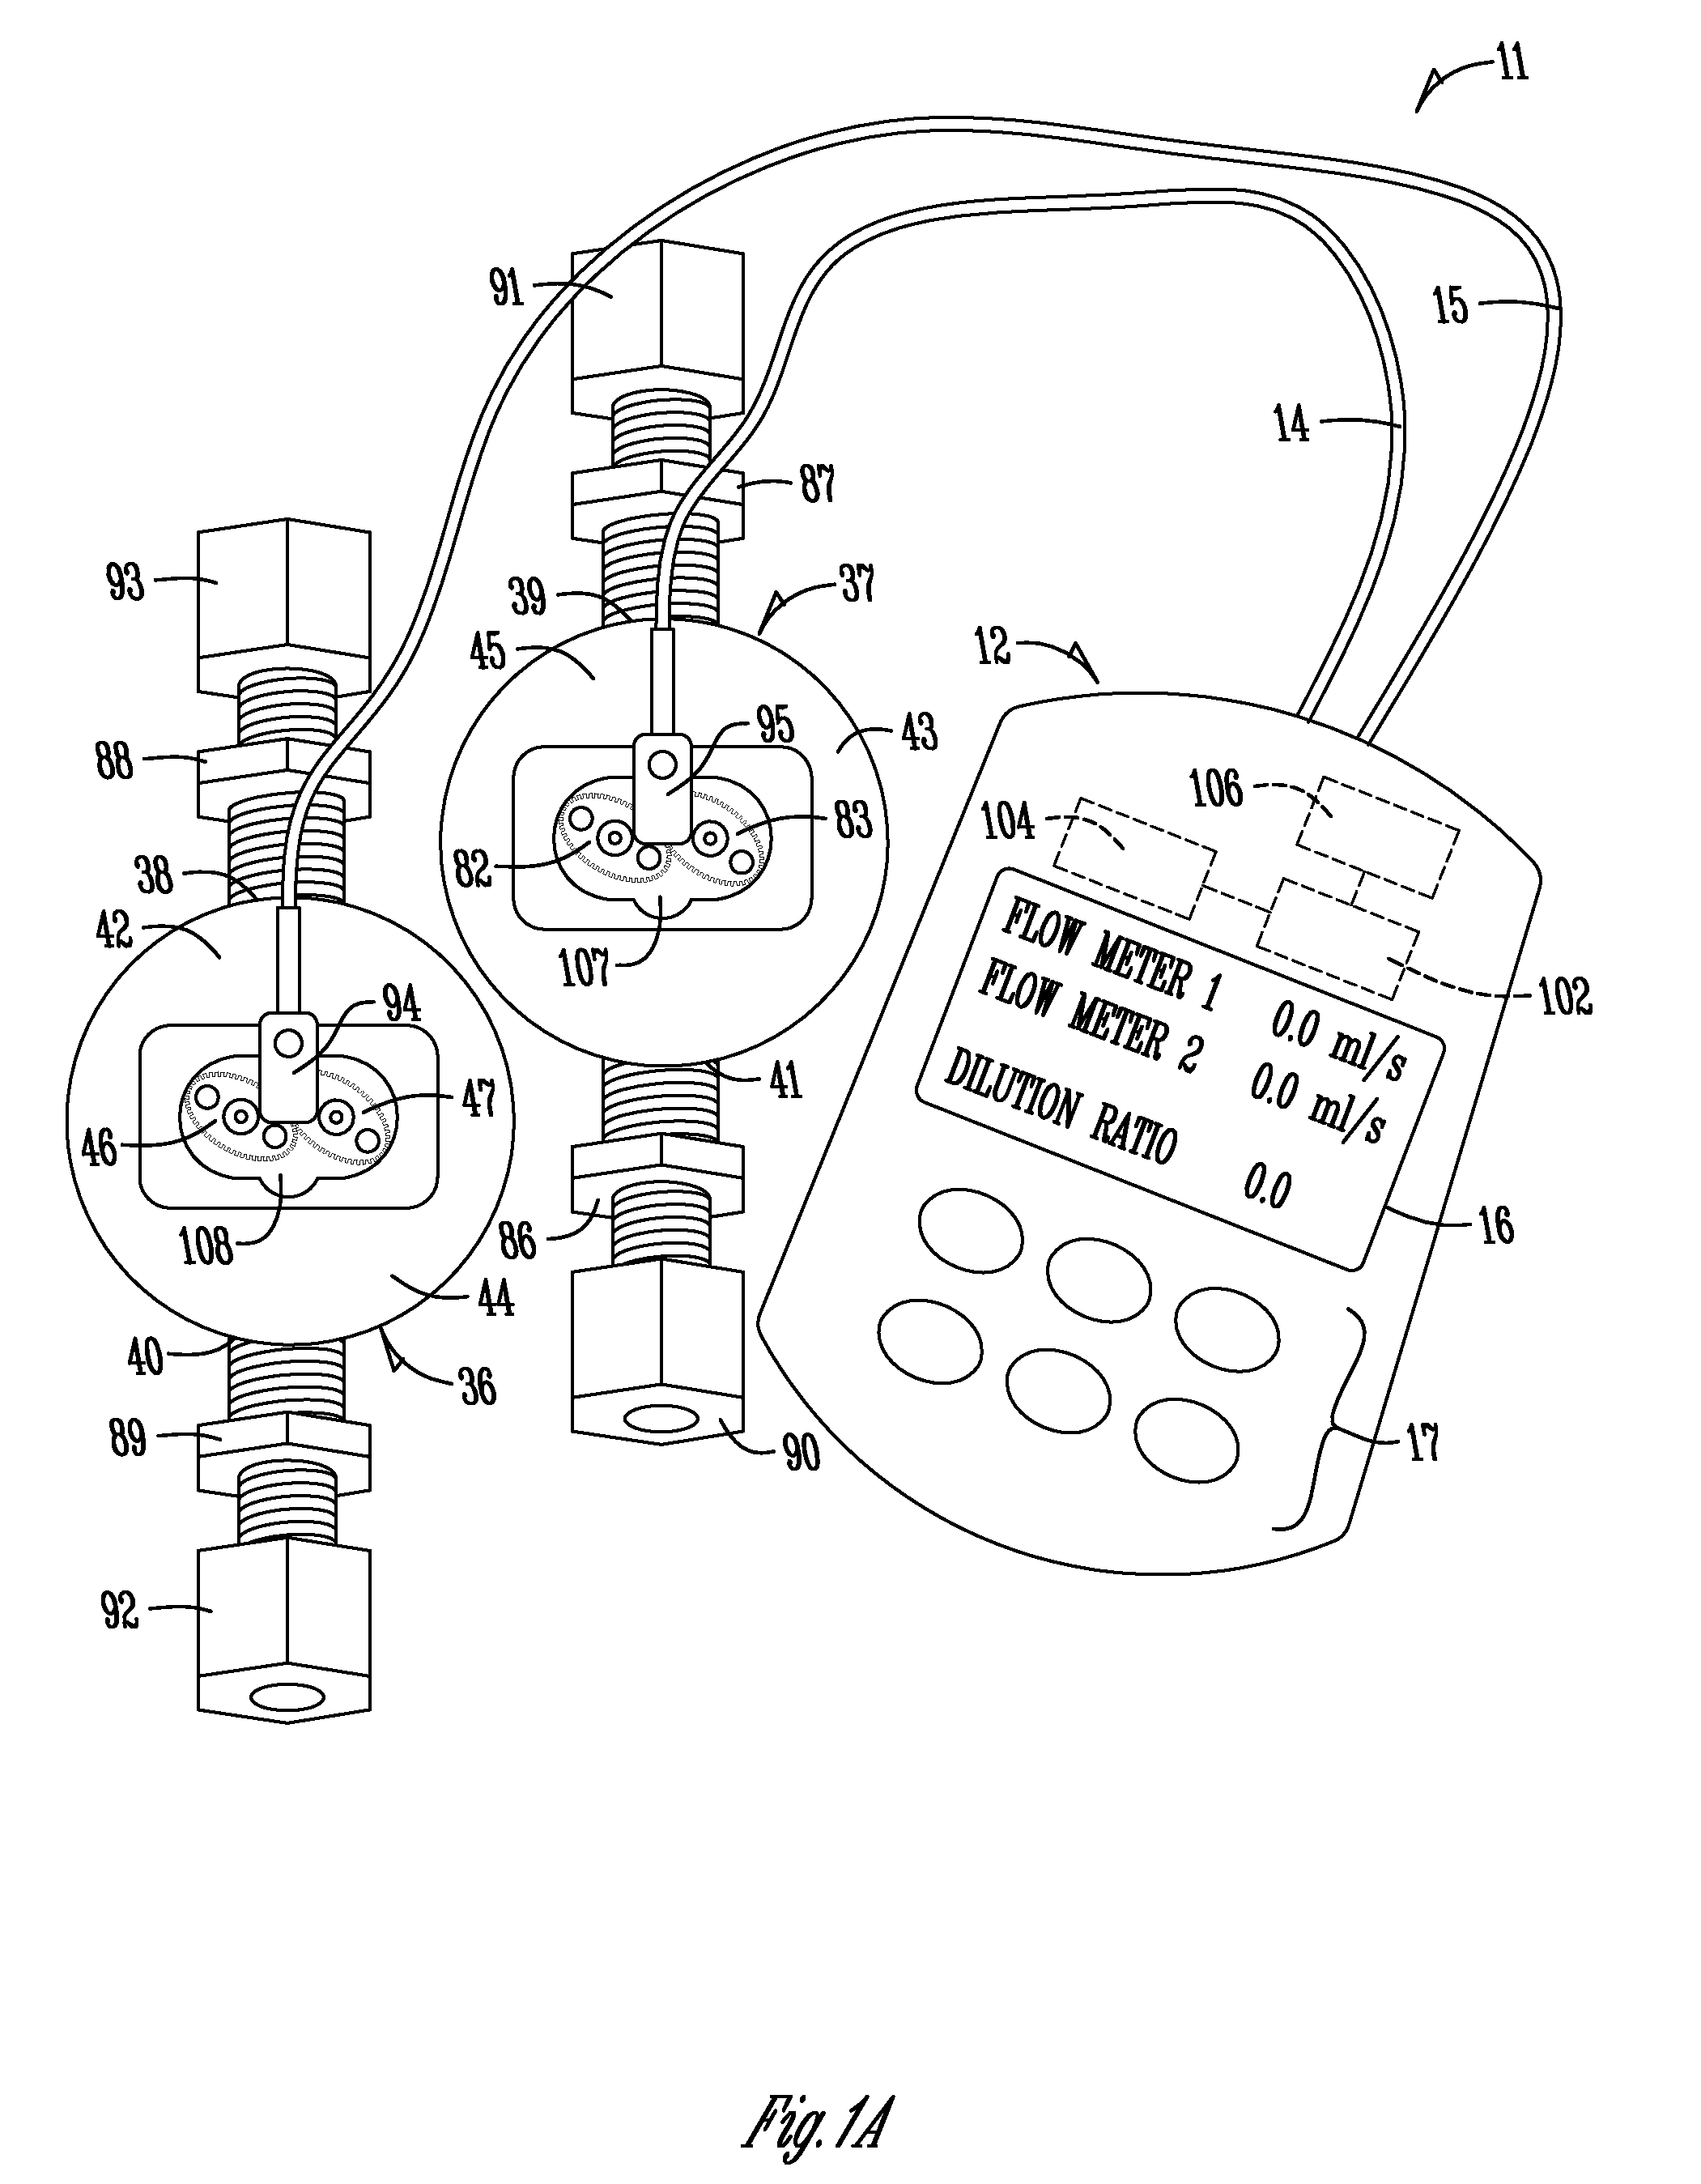 Apparatus, method and system for calibrating a liquid dispensing system